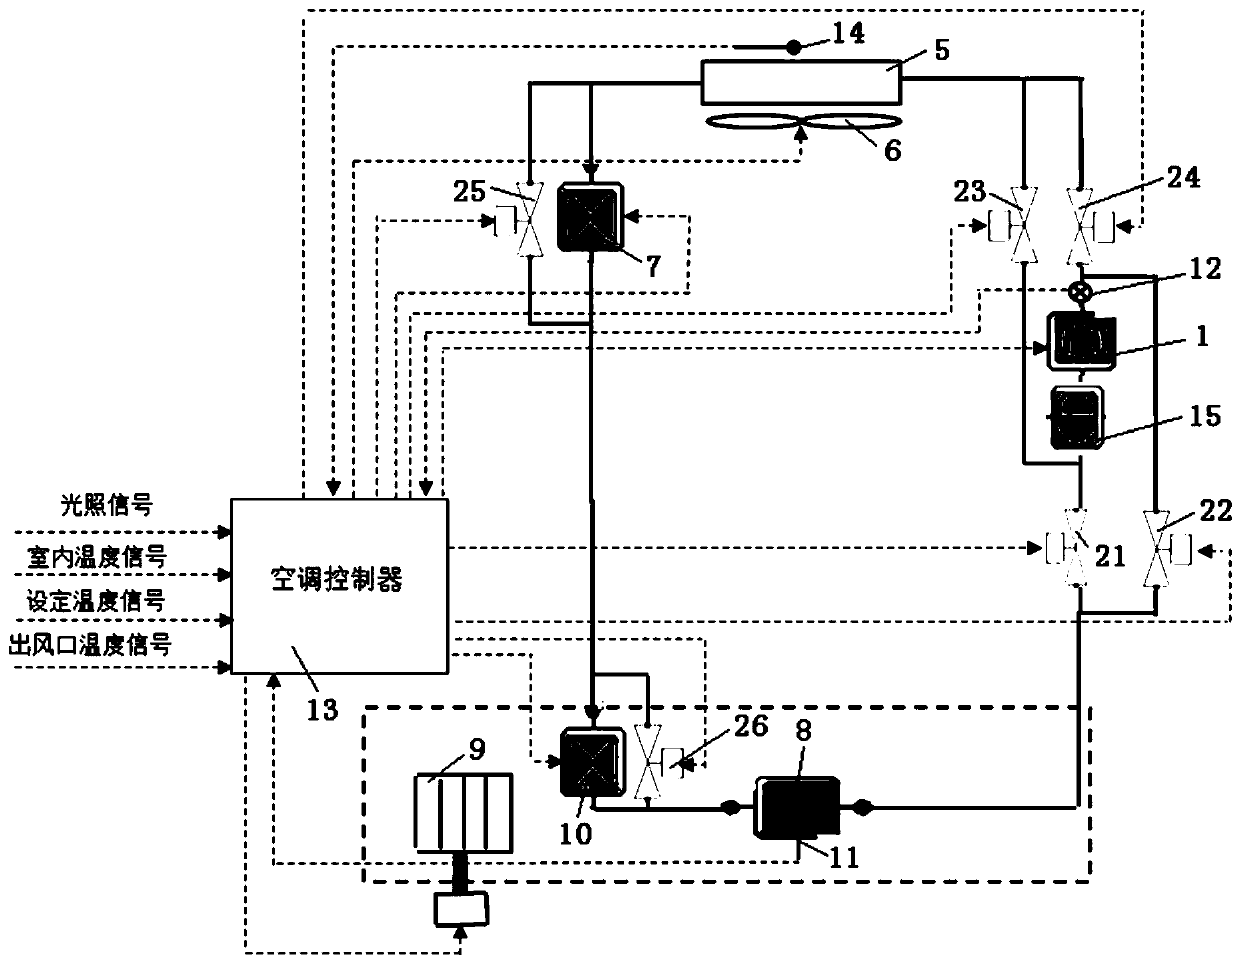 An economical electric vehicle air conditioning system and control method